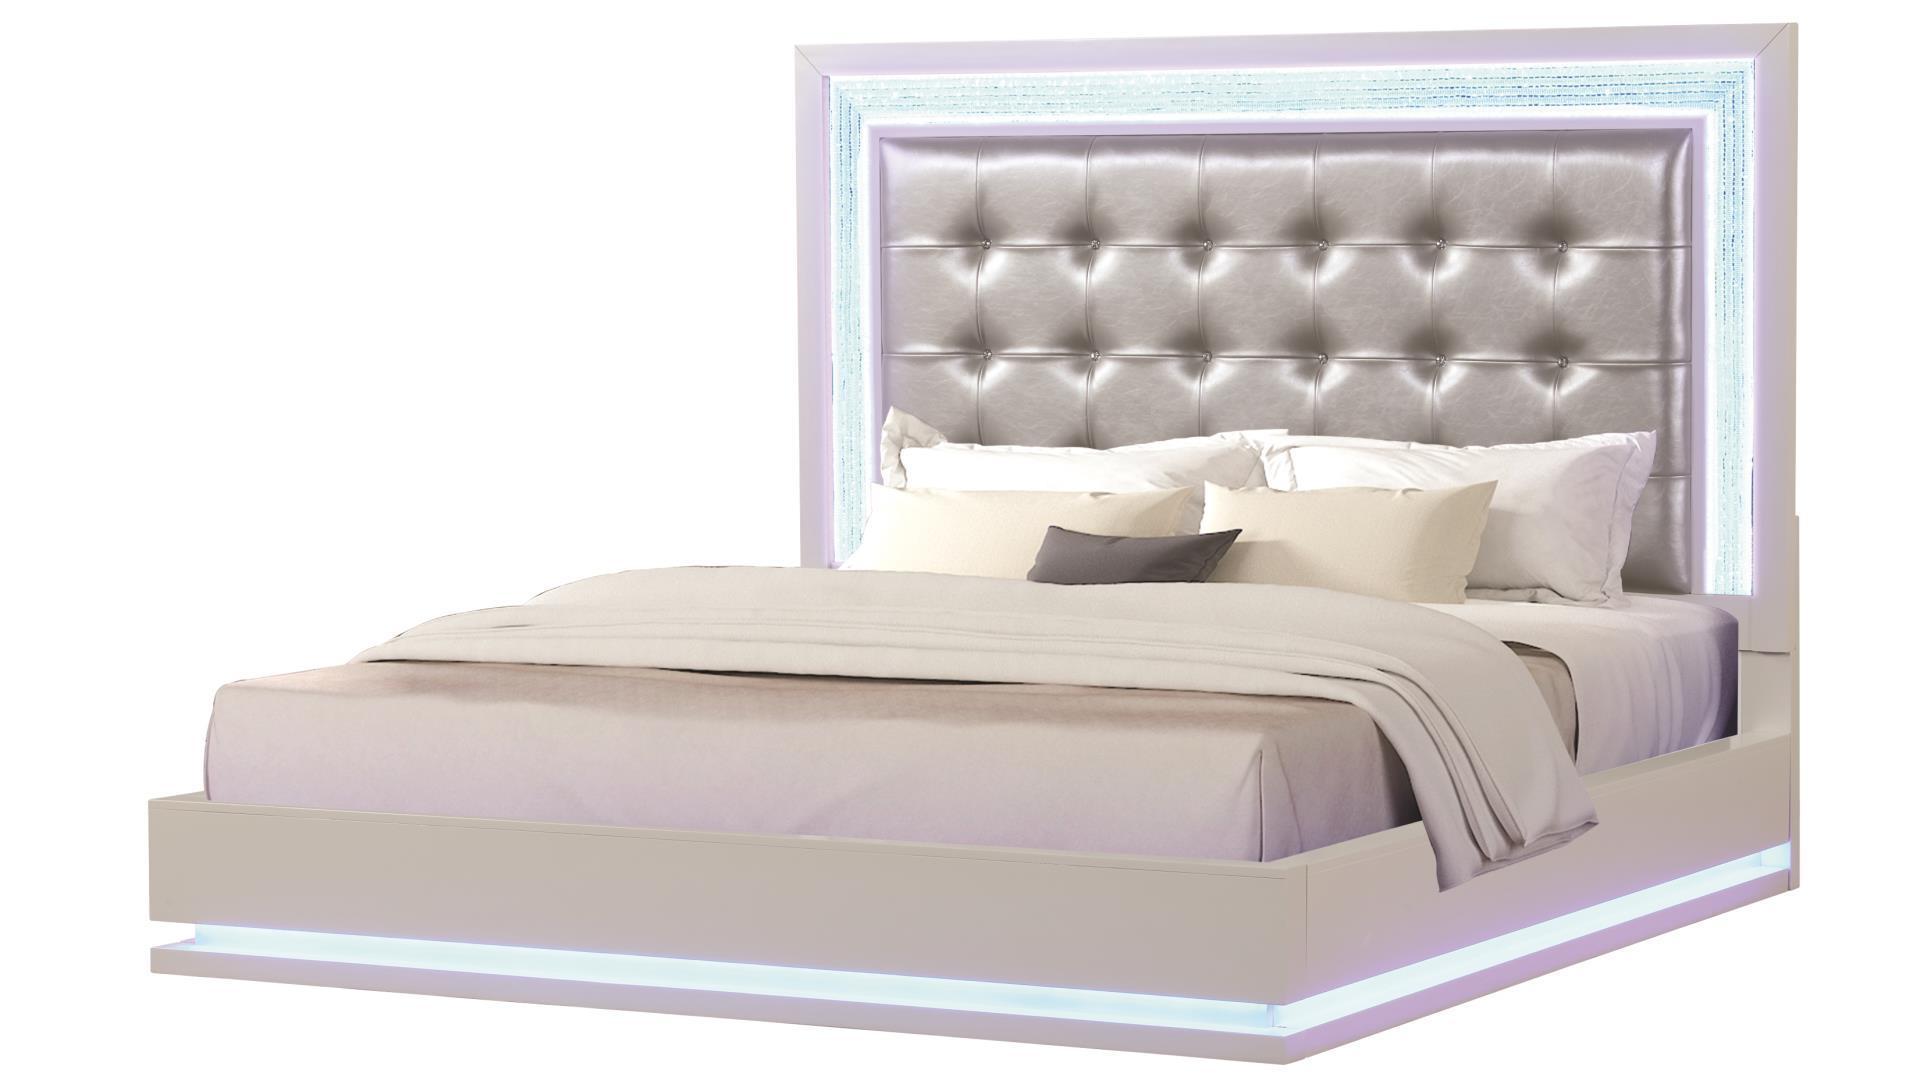 

    
Milky White Tufted Queen Led Bed Set w/Vanity 4Pcs PASSION Galaxy Home Modern
